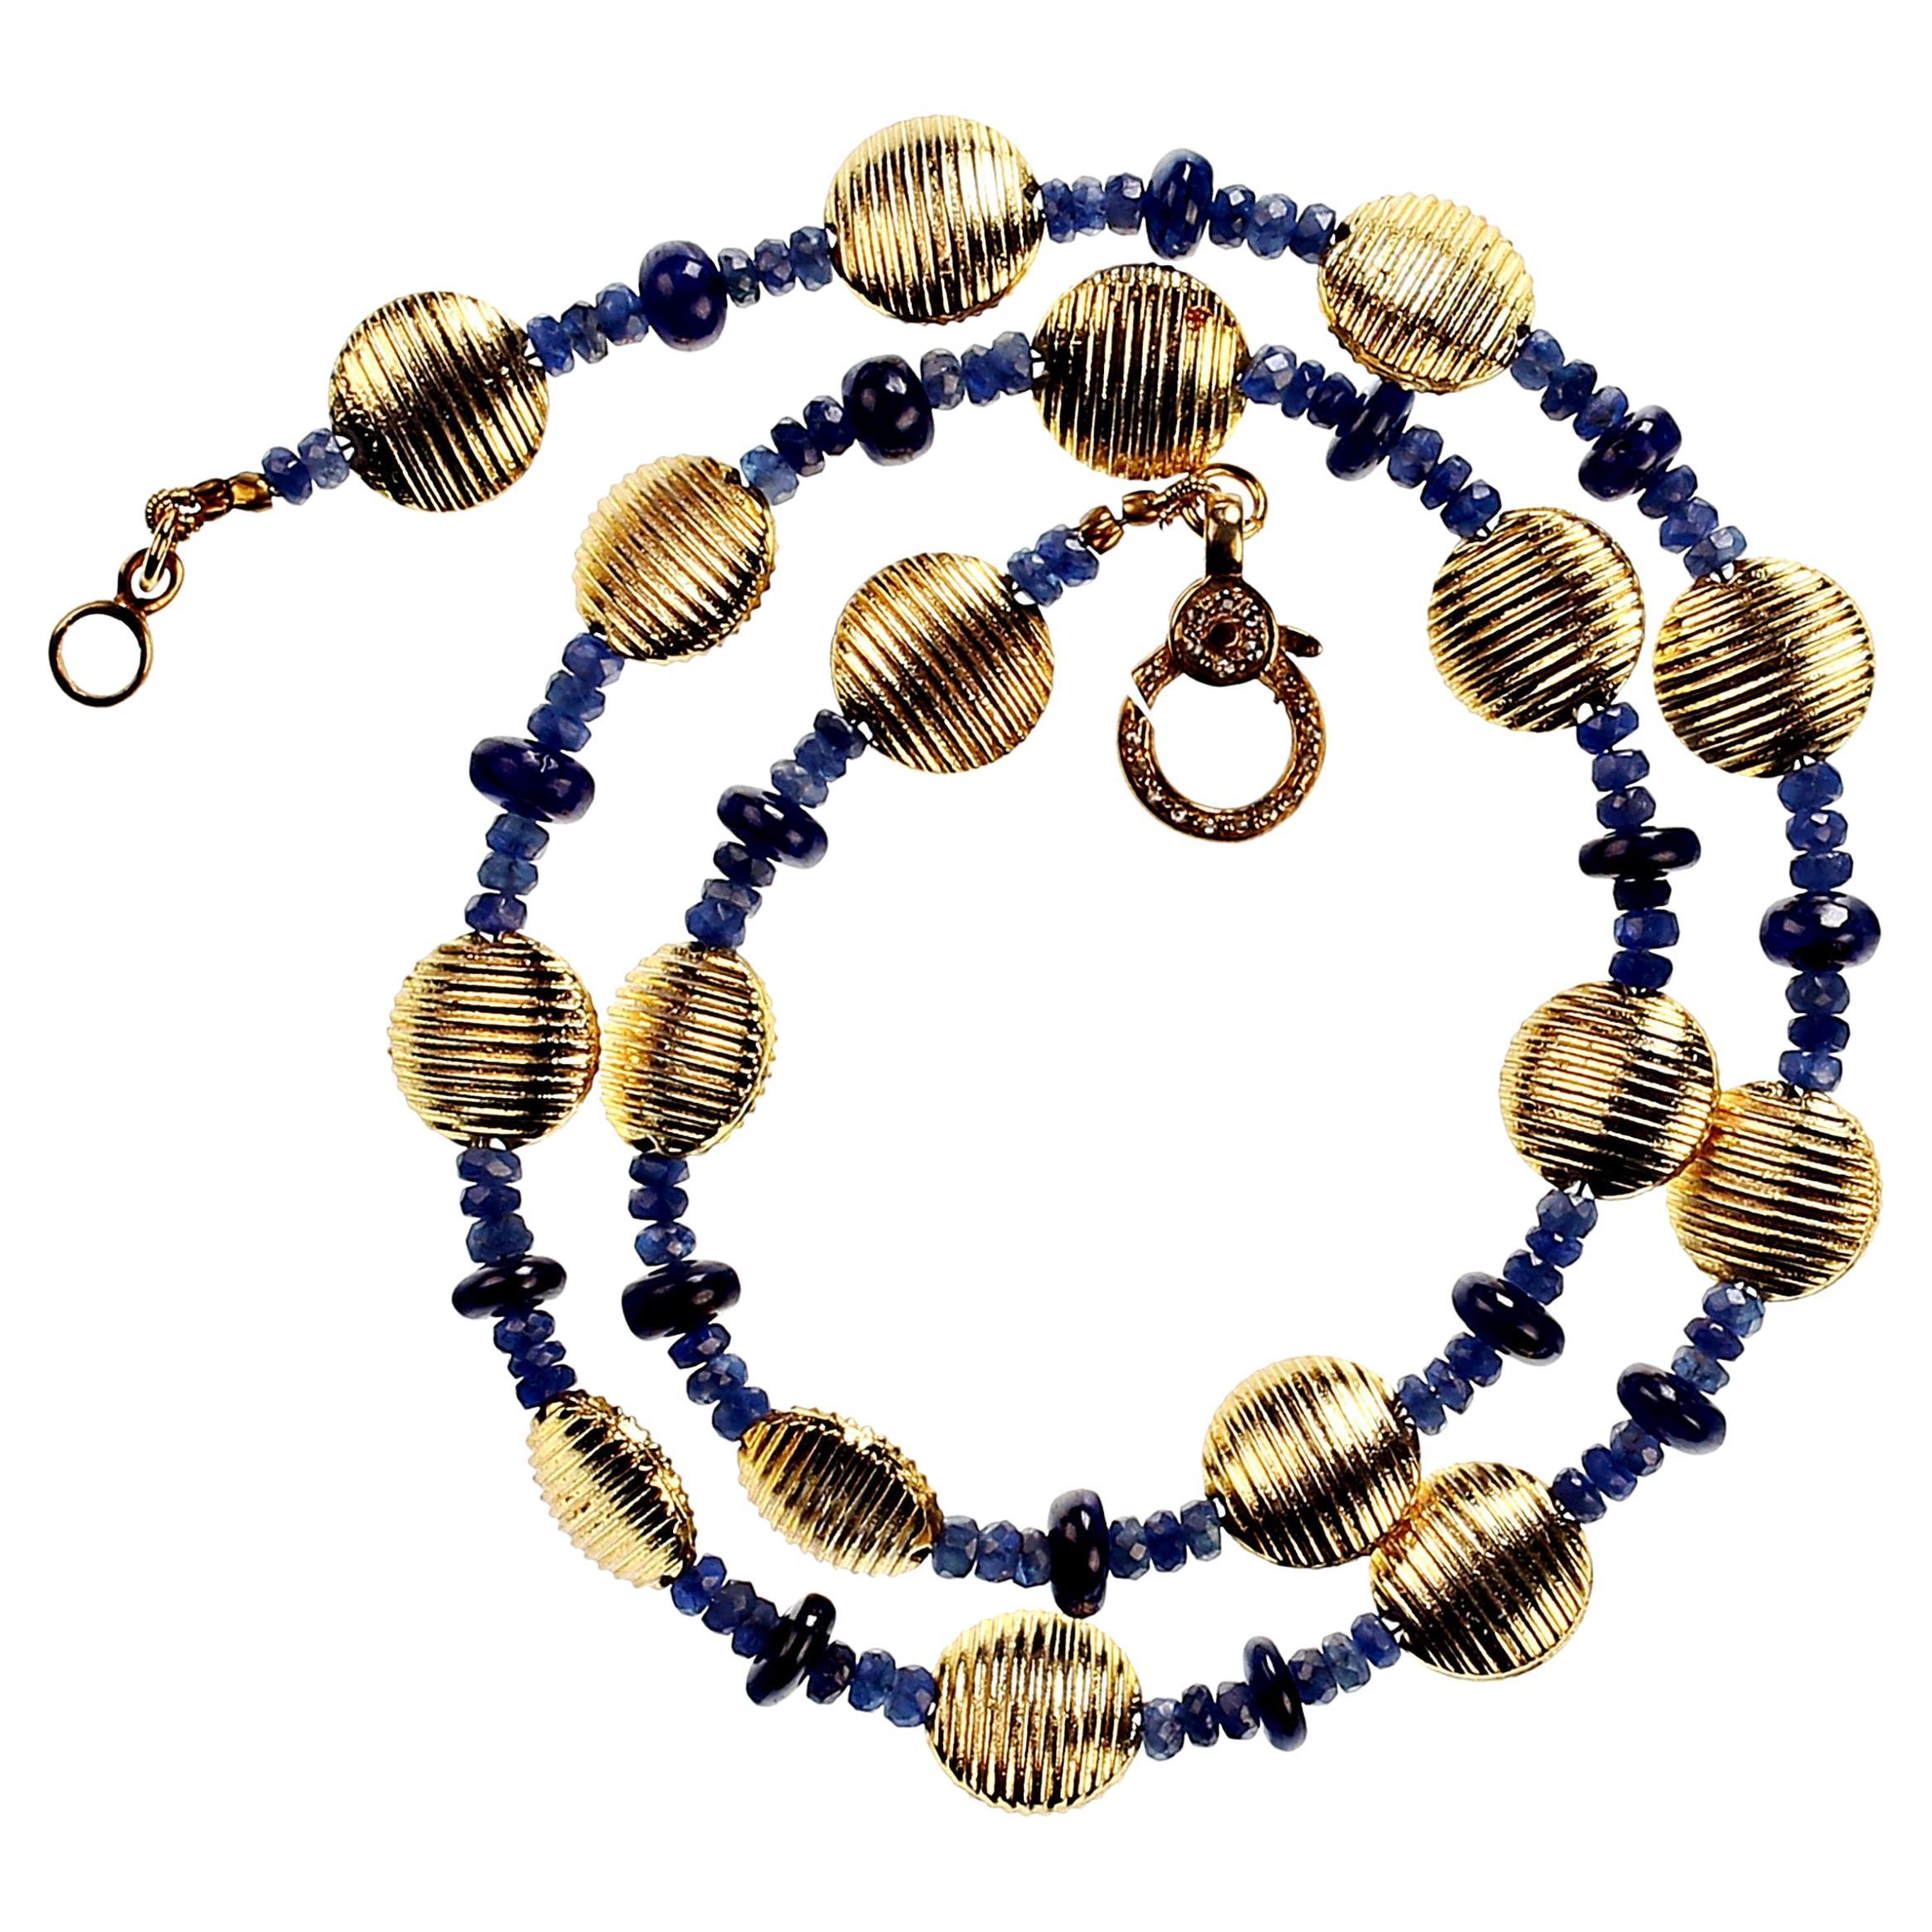  AJD Elegant Blue Sapphire and Gold Choker Necklace  Great Gift!!